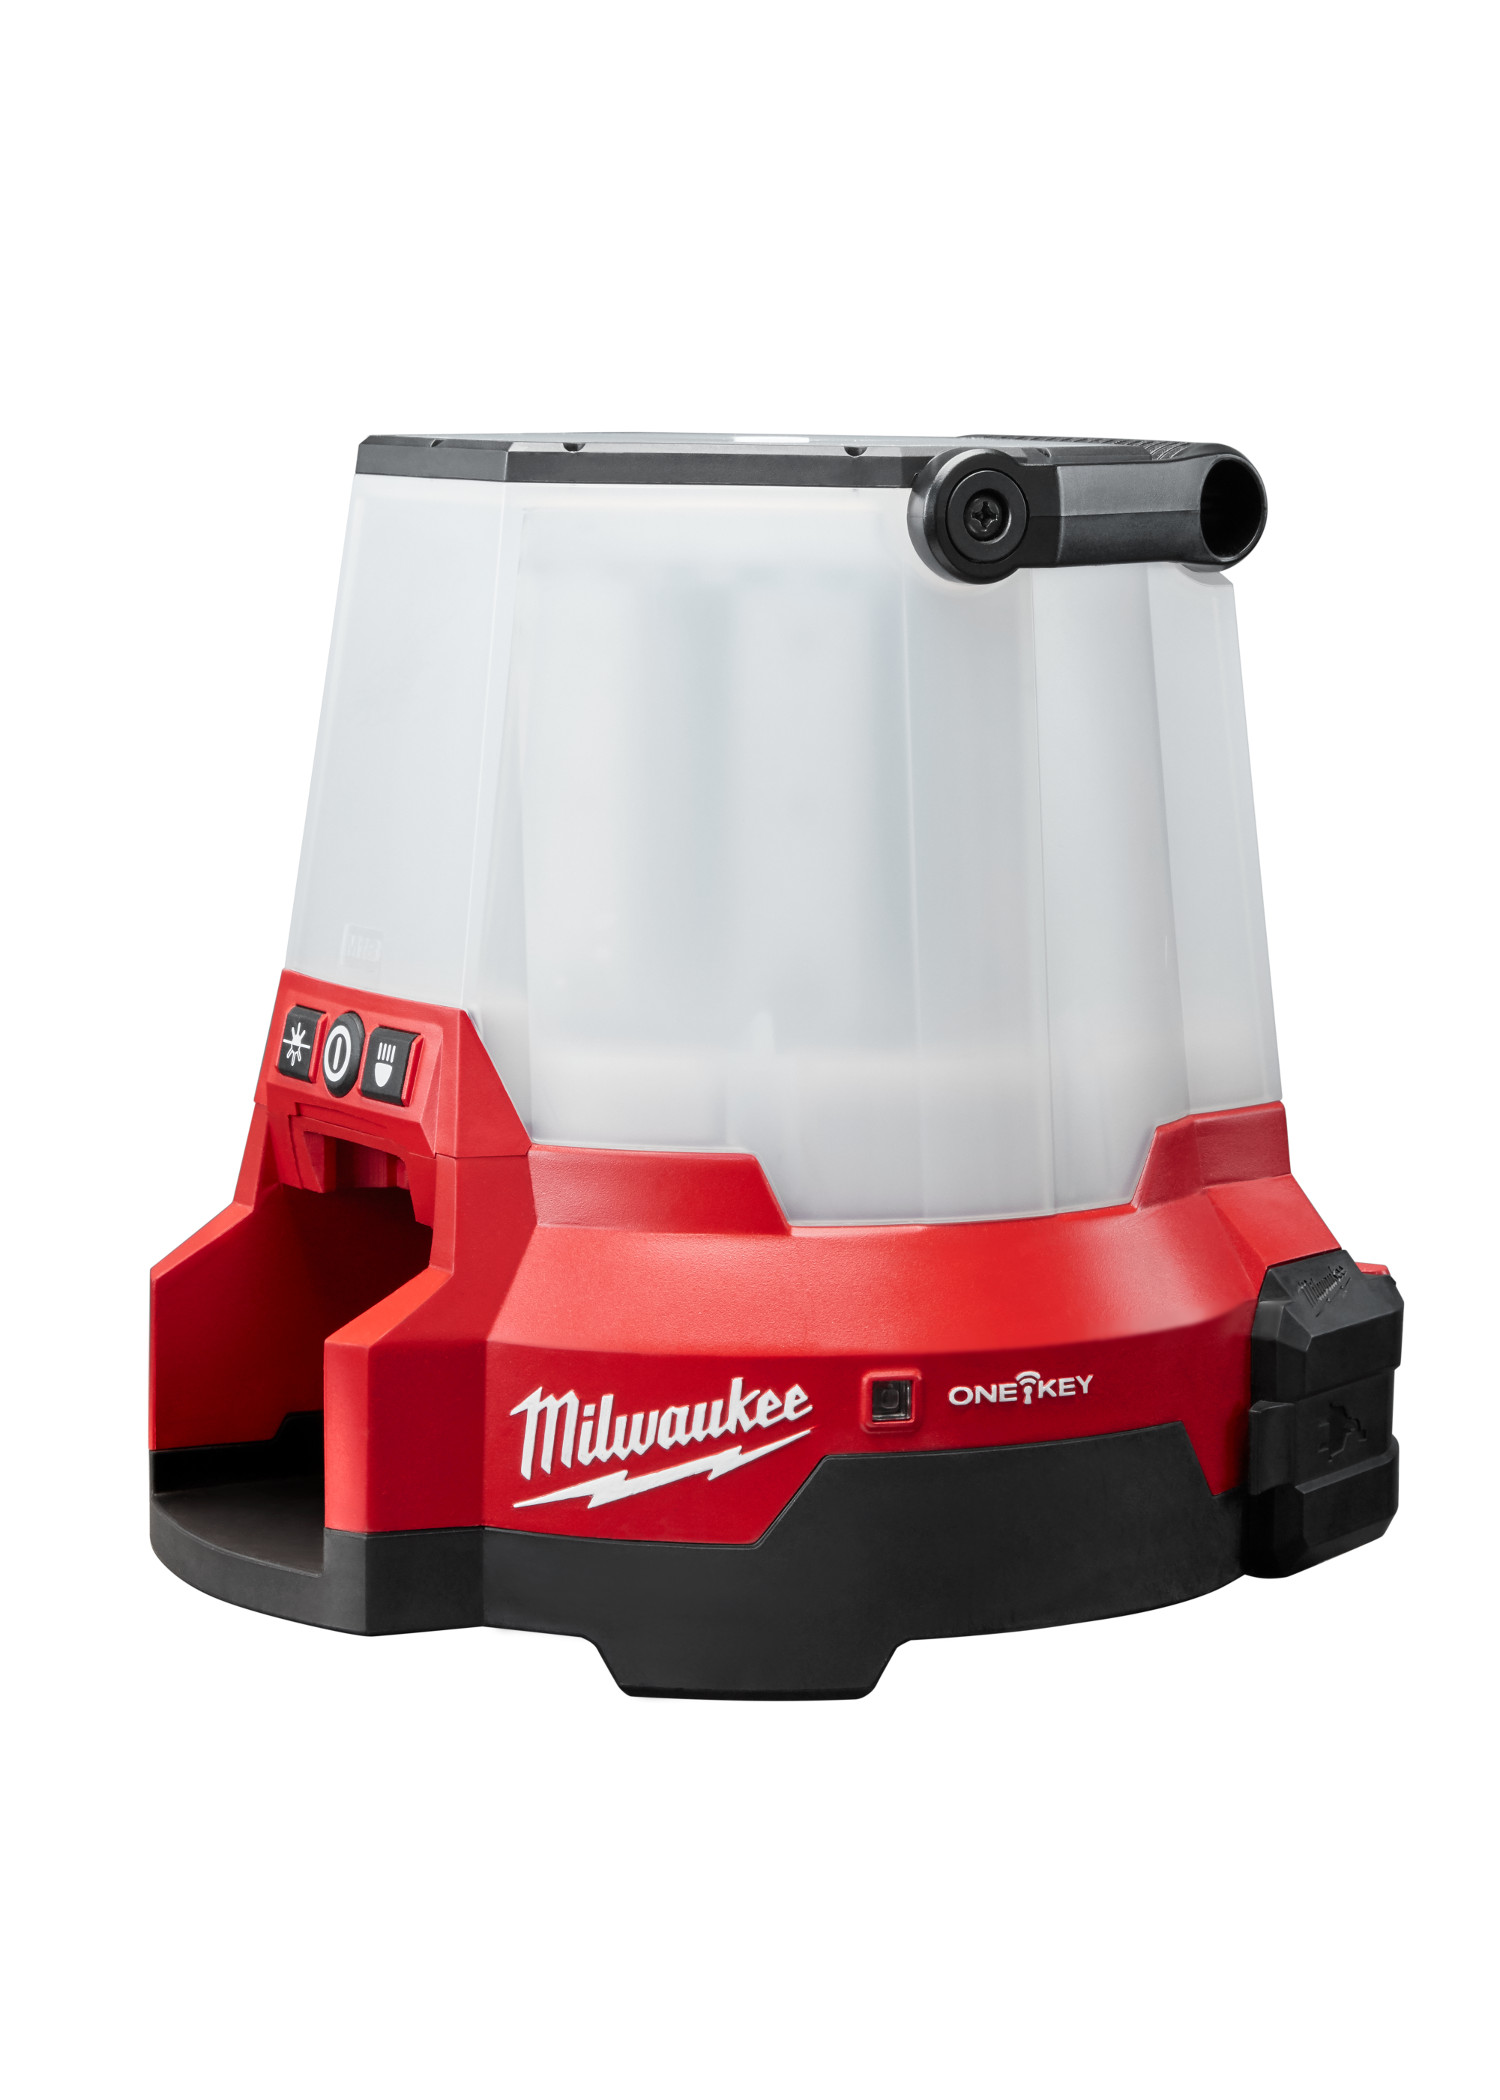 MILWAUKEE 2146-20 M18 18 Volt Lithium-Ion Cordless RADIUS LED Compact Site  Light with ONE-KEY Tool Only